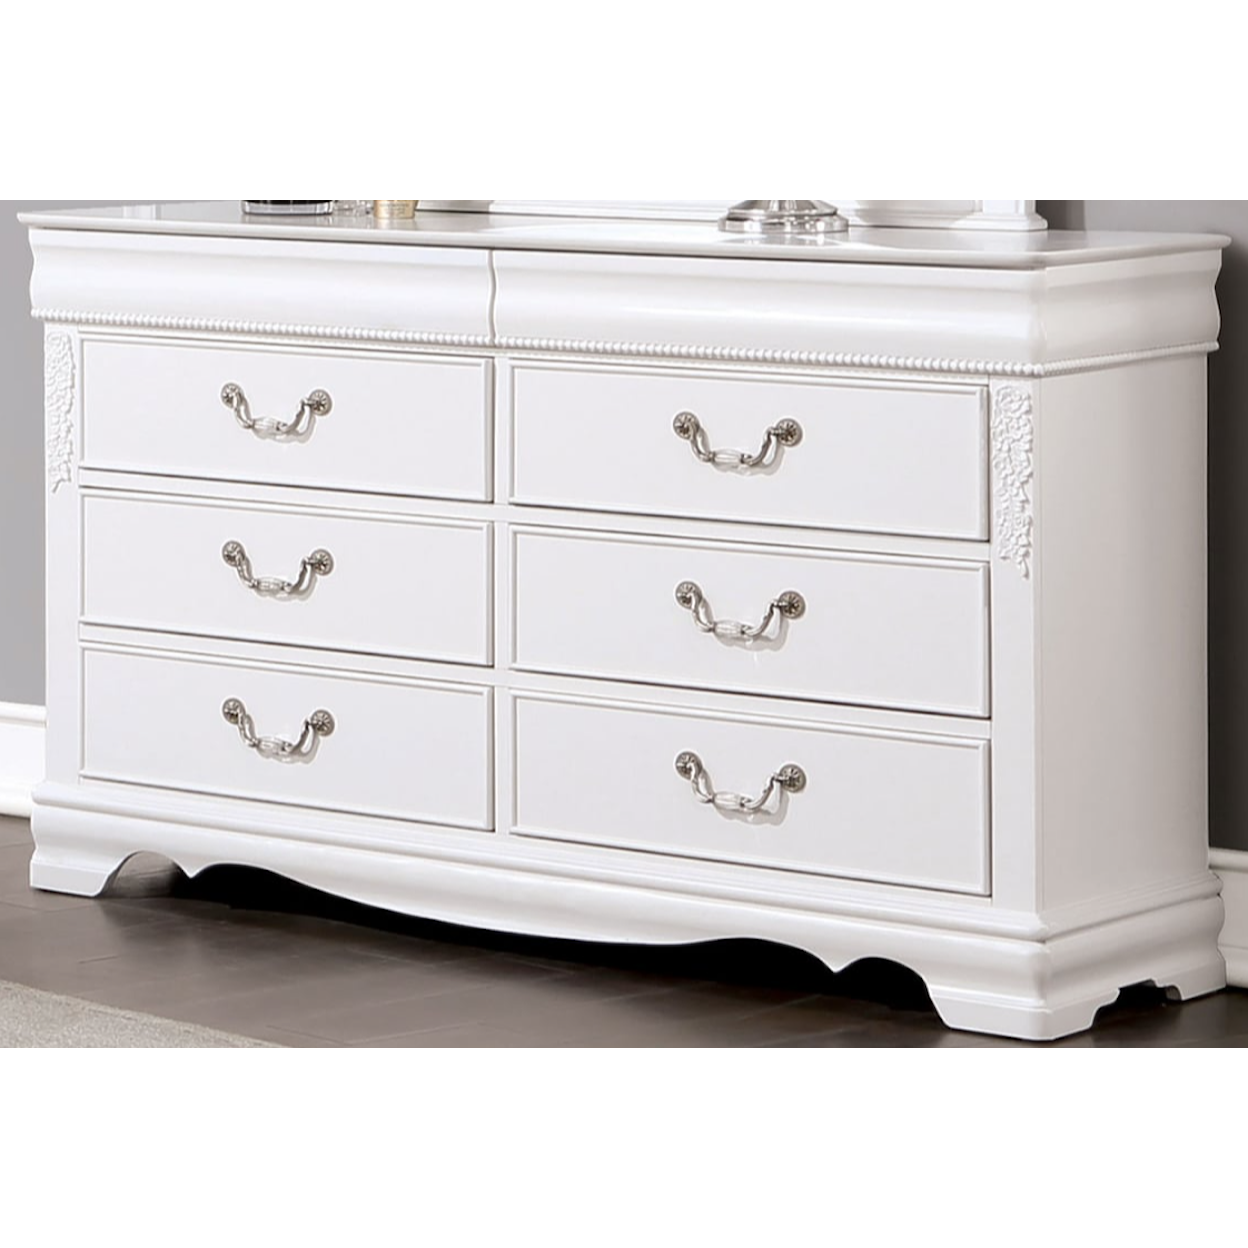 Furniture of America Alecia 6-Drawer Dresser with Carved Wood Accents